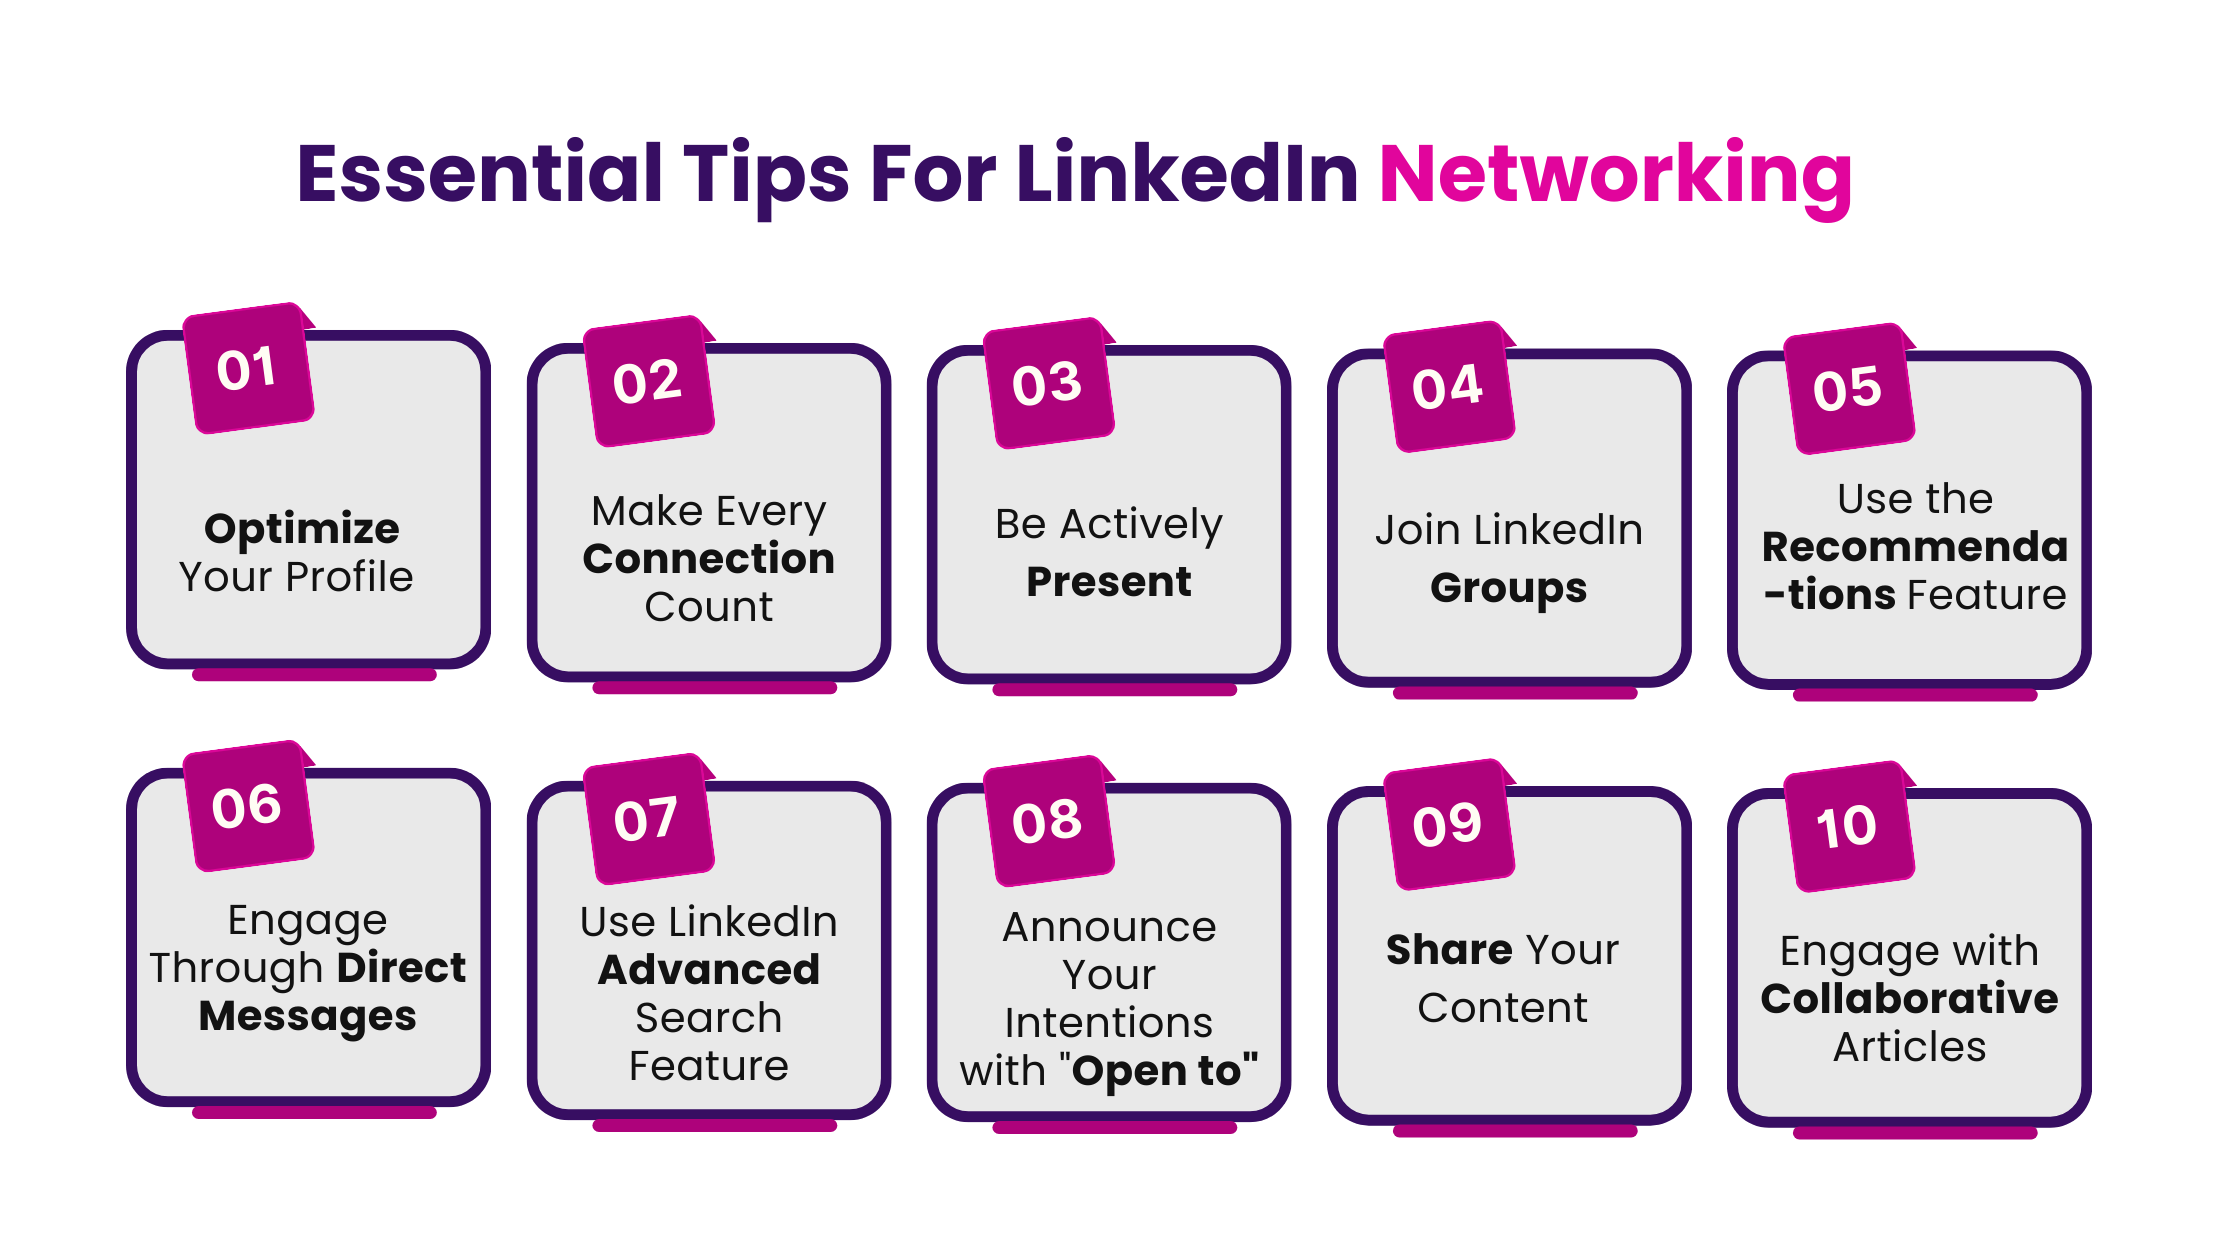 Essential Tips For LinkedIn Networking